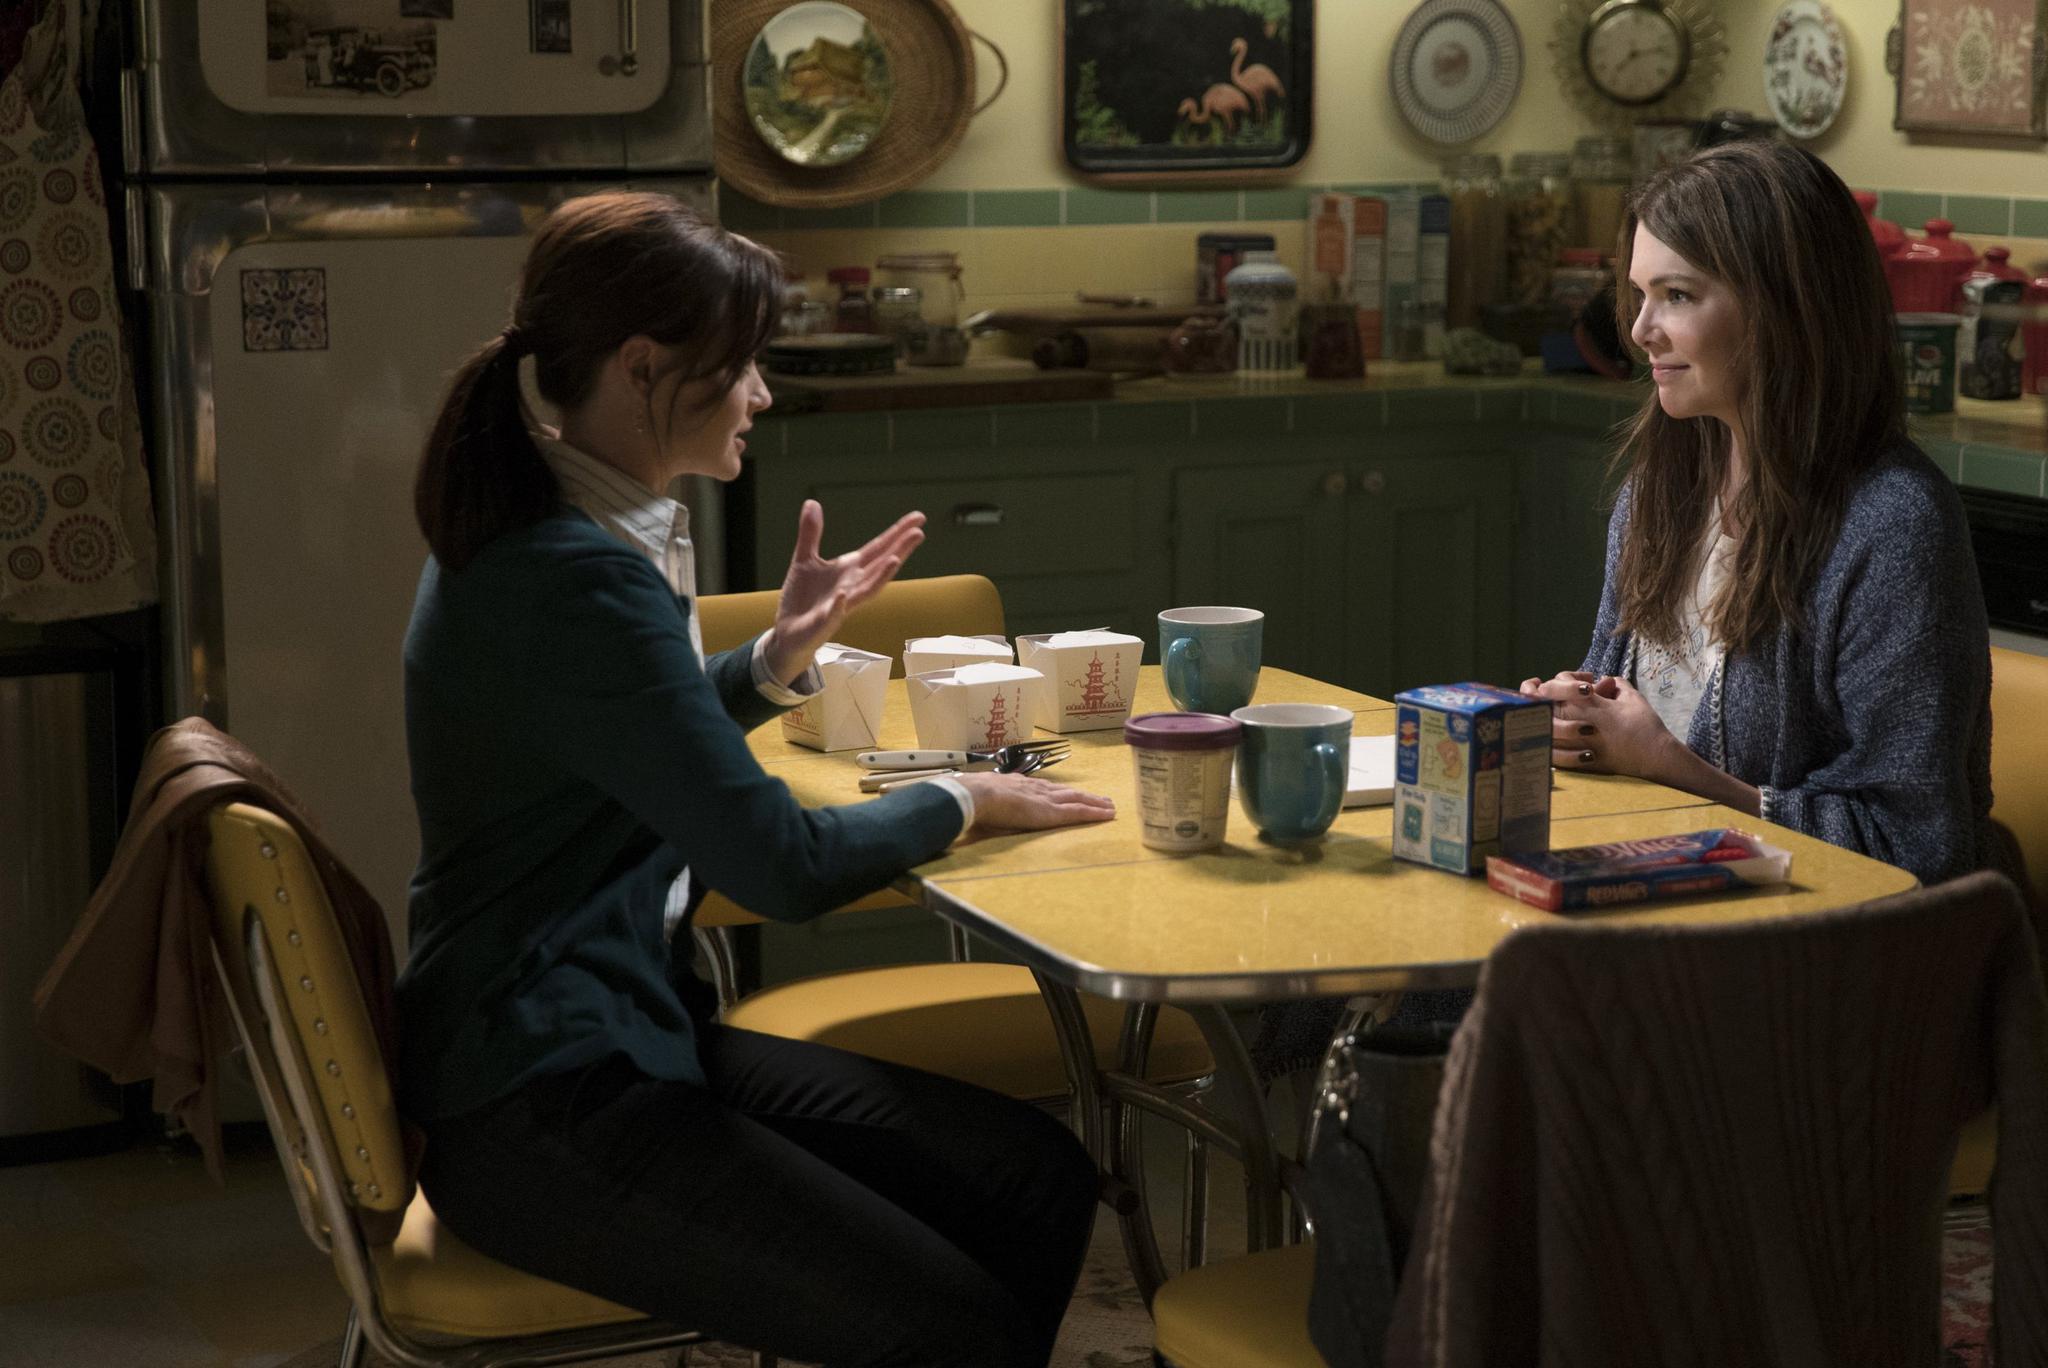 Lorelai and Rory Gilmore are back in Netflix's revival of "Gilmore Girls." The show will launch in the fall.